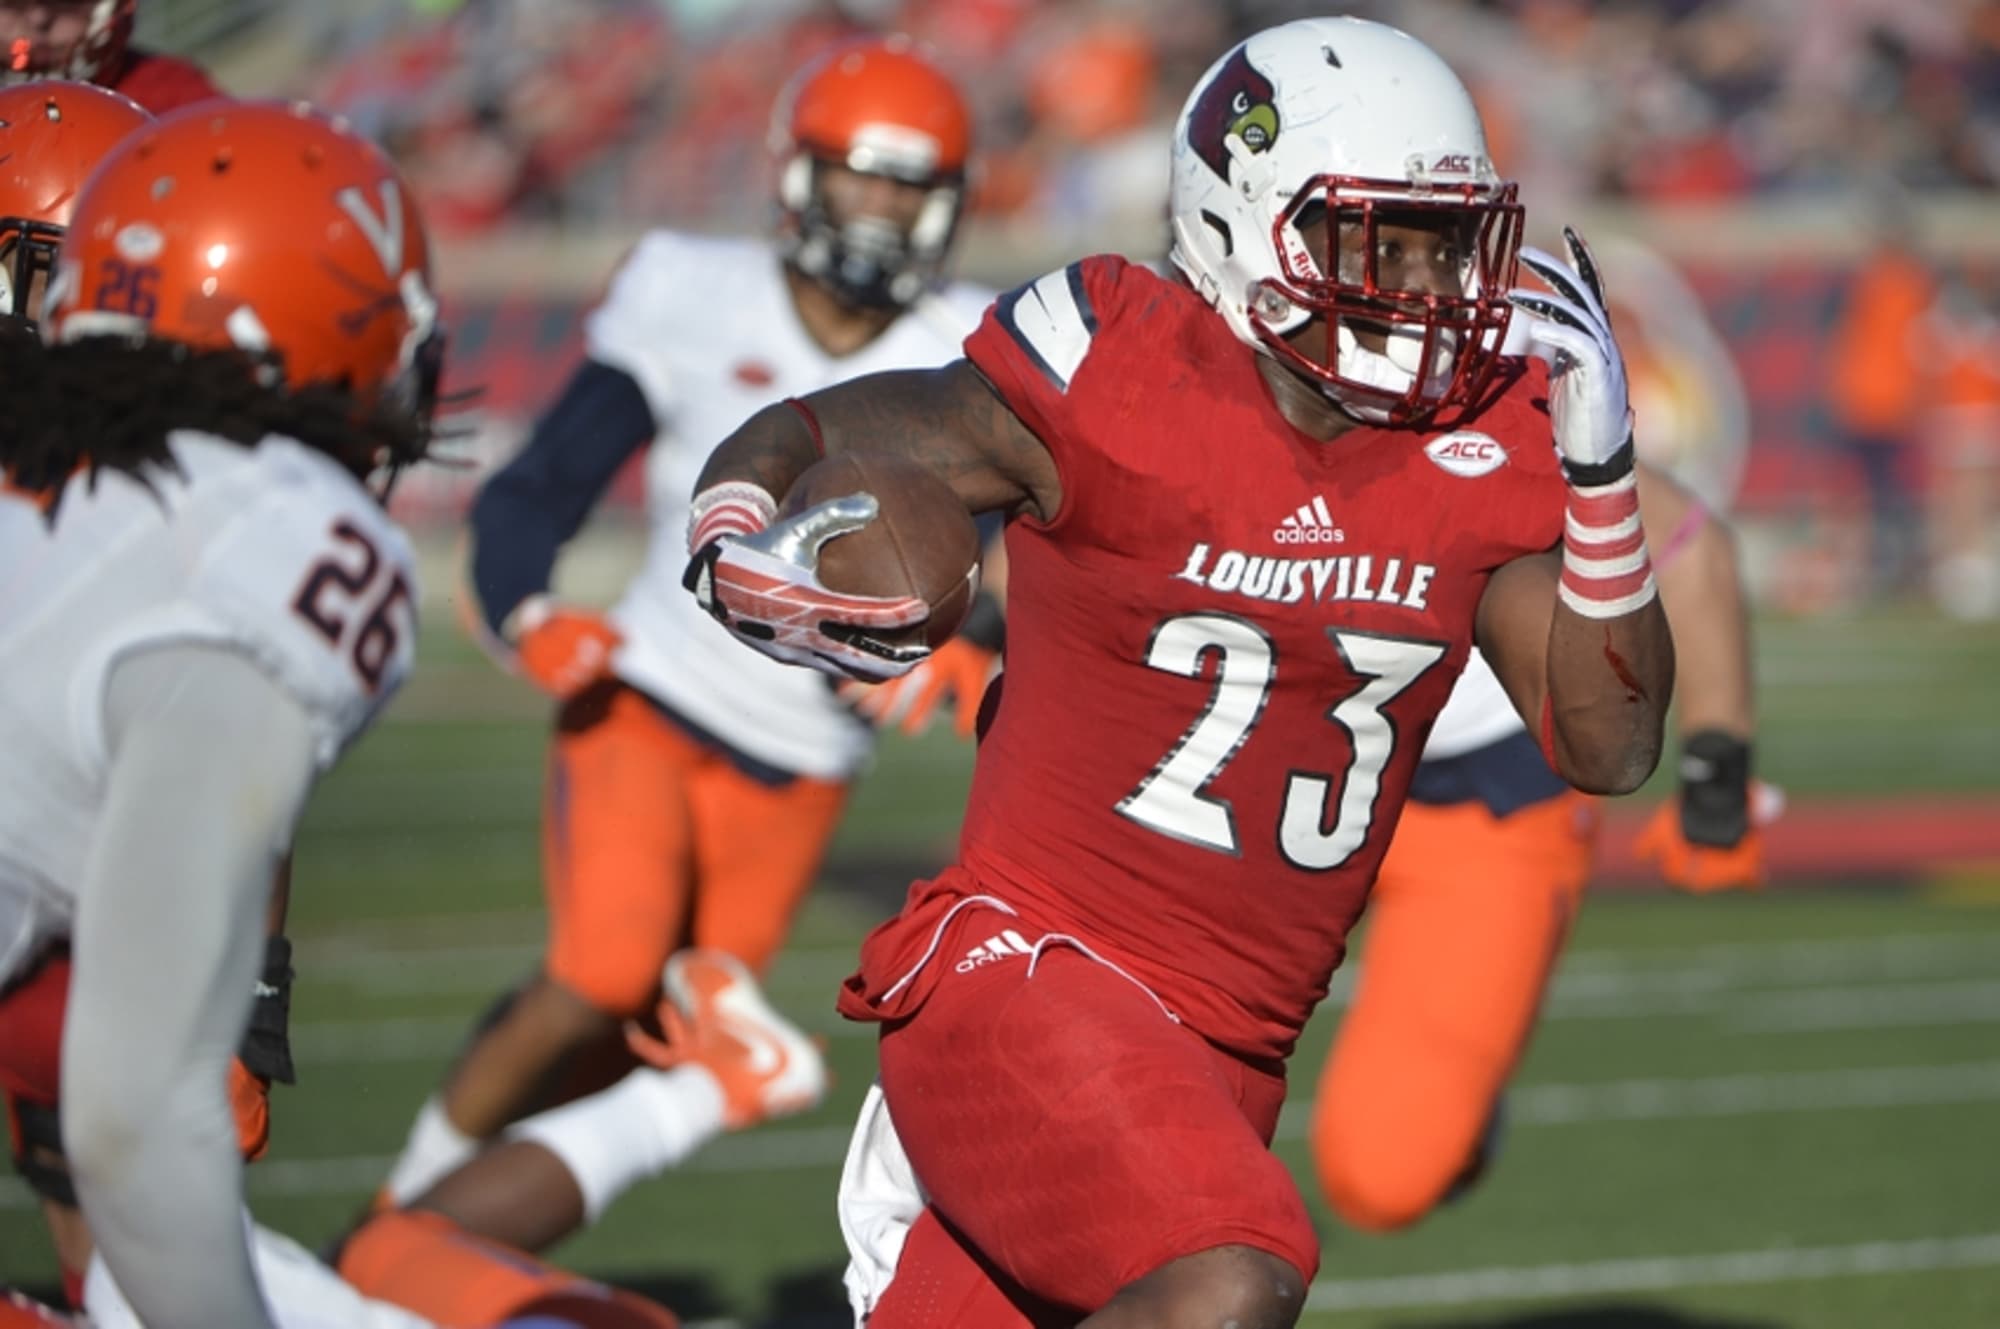 Top 5 Louisville football games of 2016: No. 5